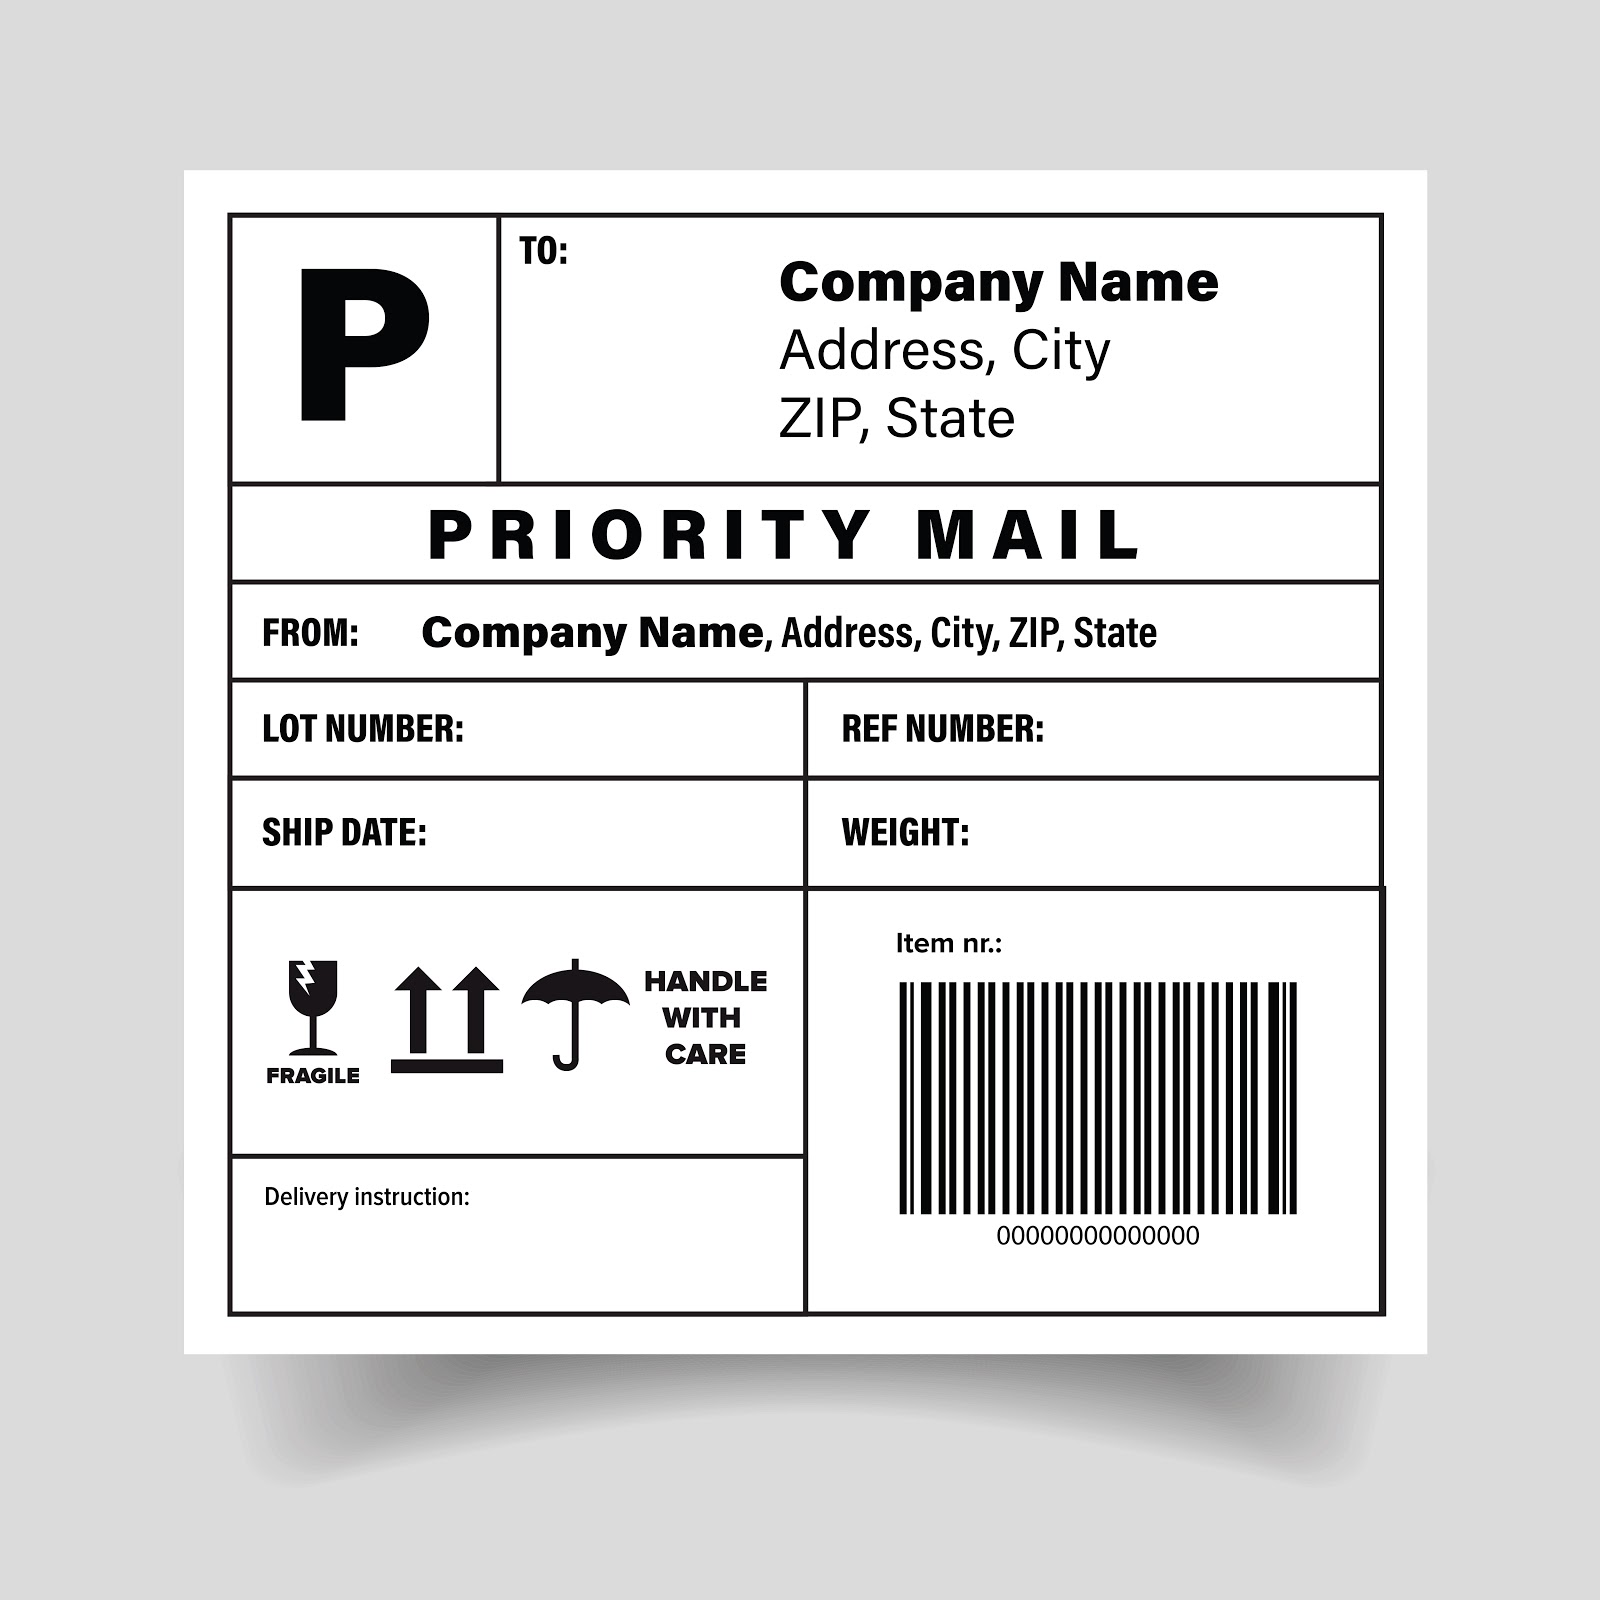 Your Shipping Label A Complete Guide